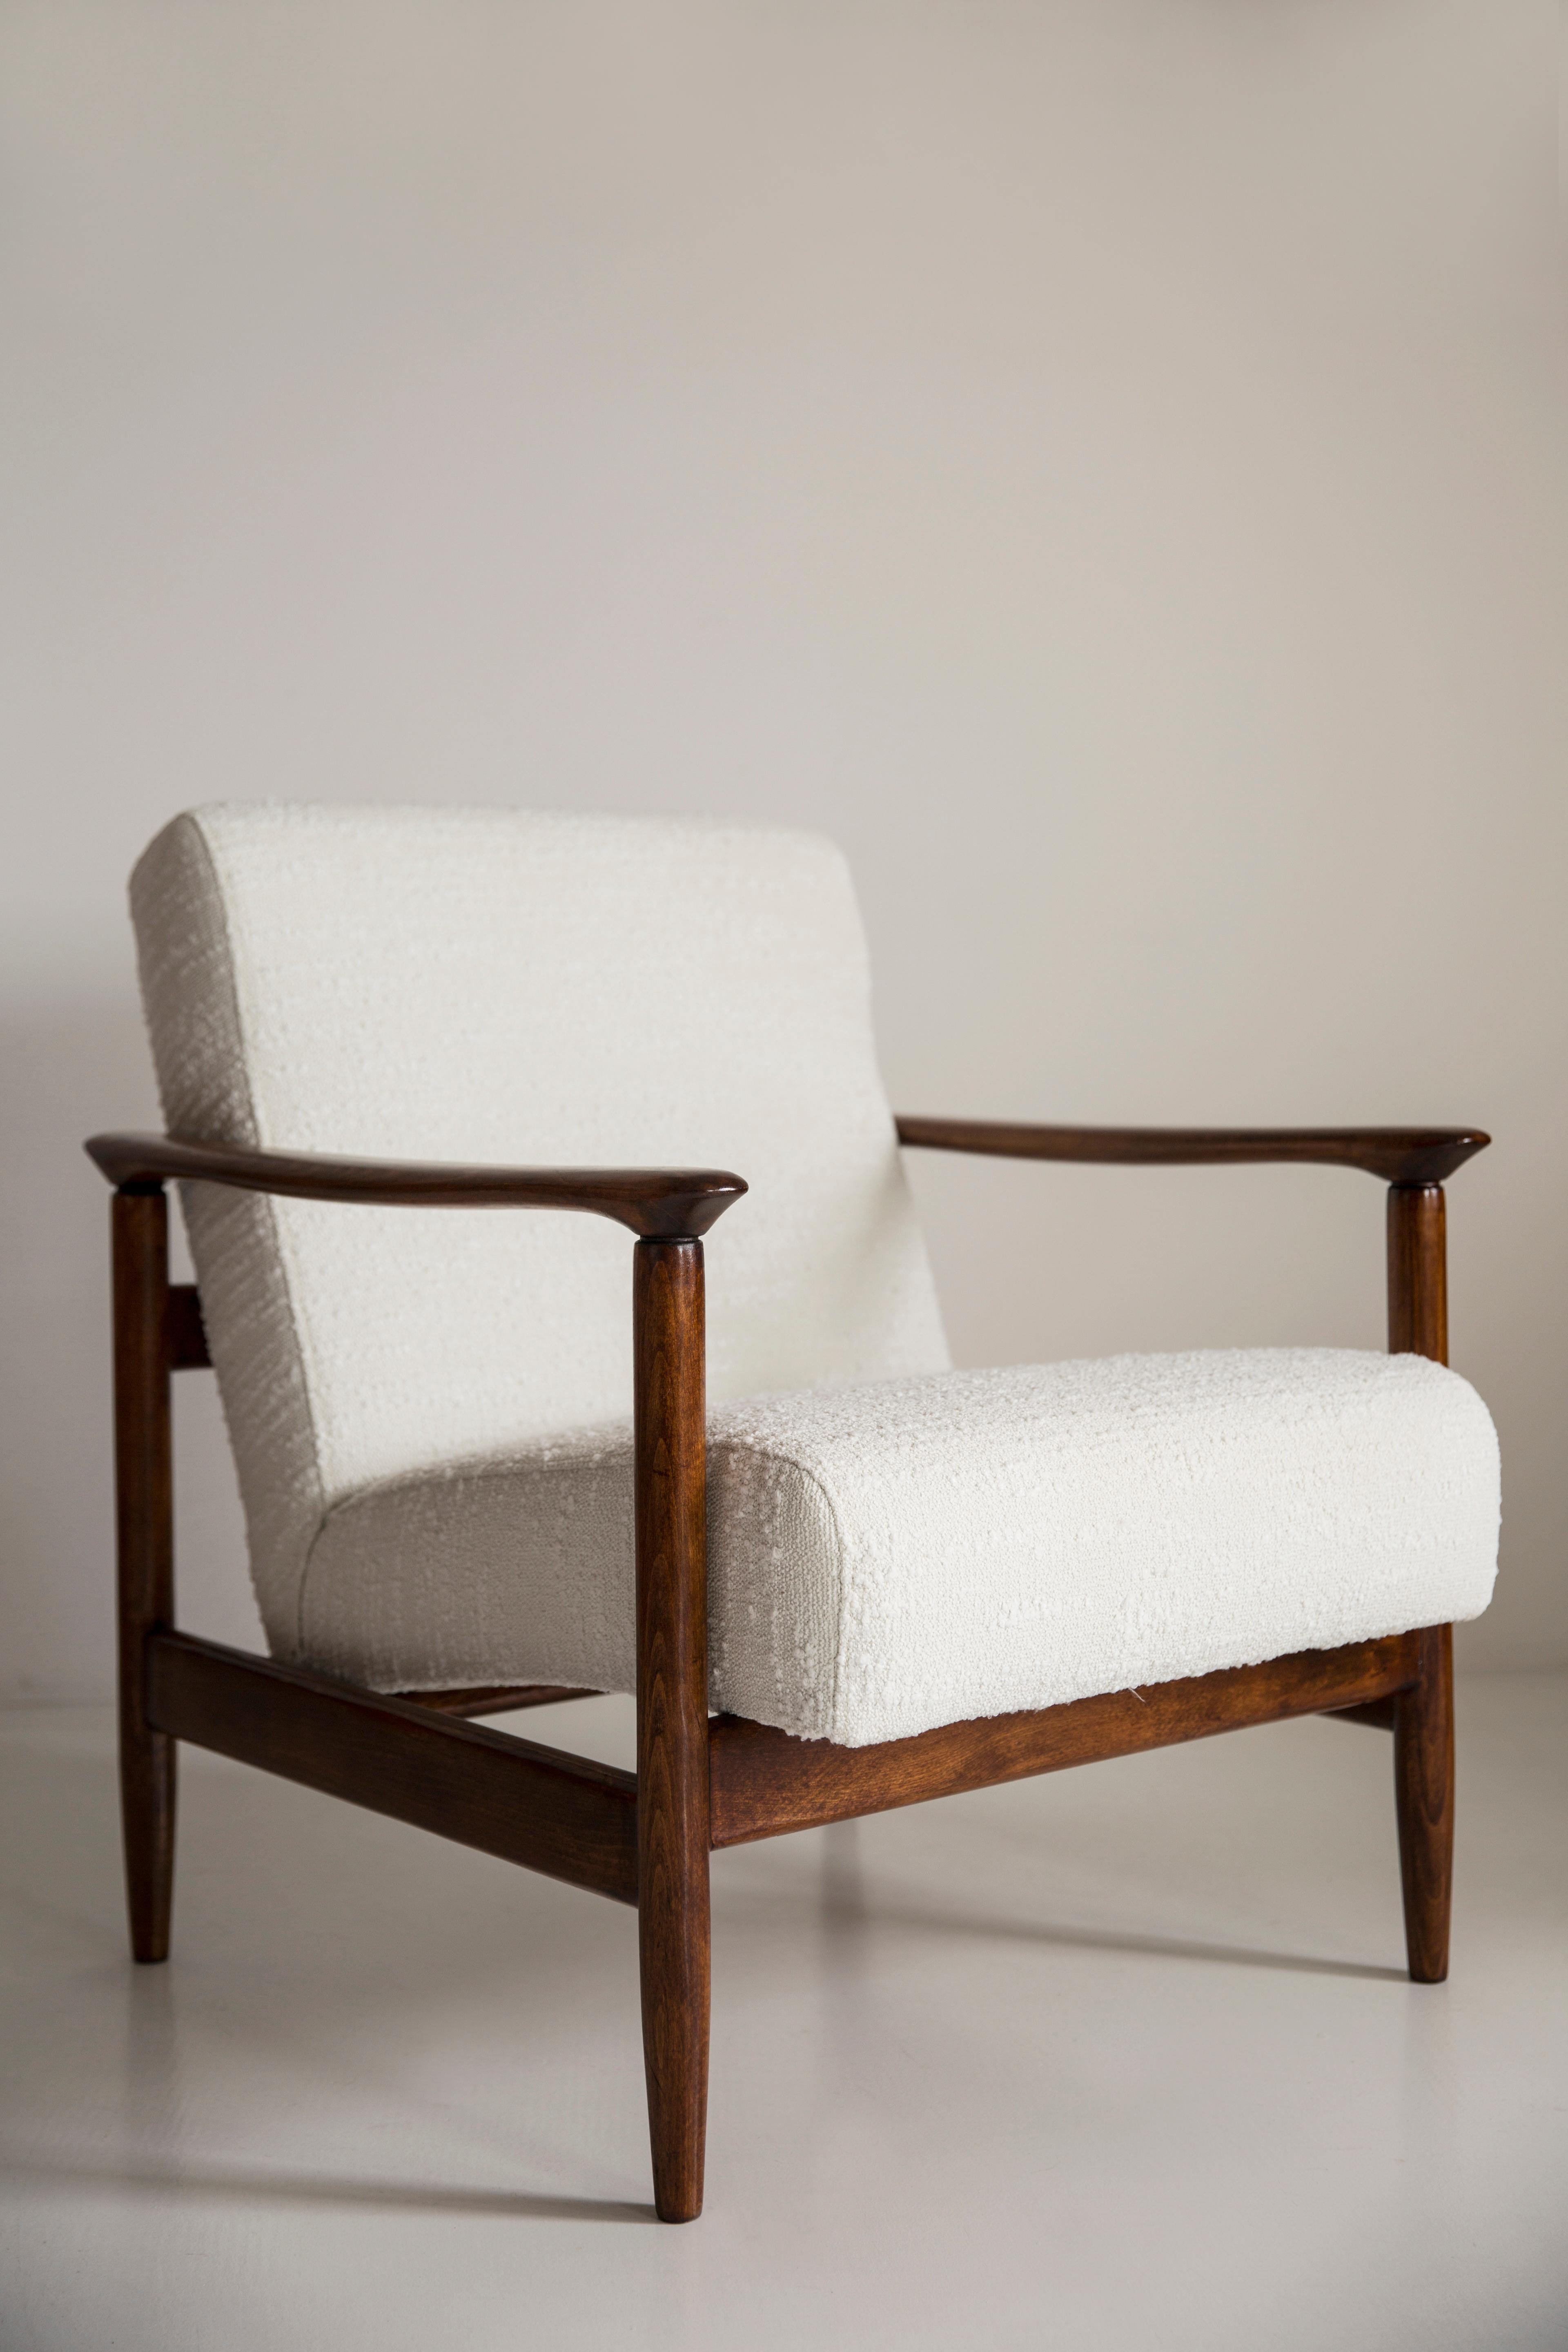 Beautiful white boucle Armchair GFM-142, designed by Edmund Homa, a polish architect, designer of Industrial Design and interior architecture, professor at the Academy of Fine Arts in Gdansk. 

The armchair was made in the 1960s in the Gosciecinska